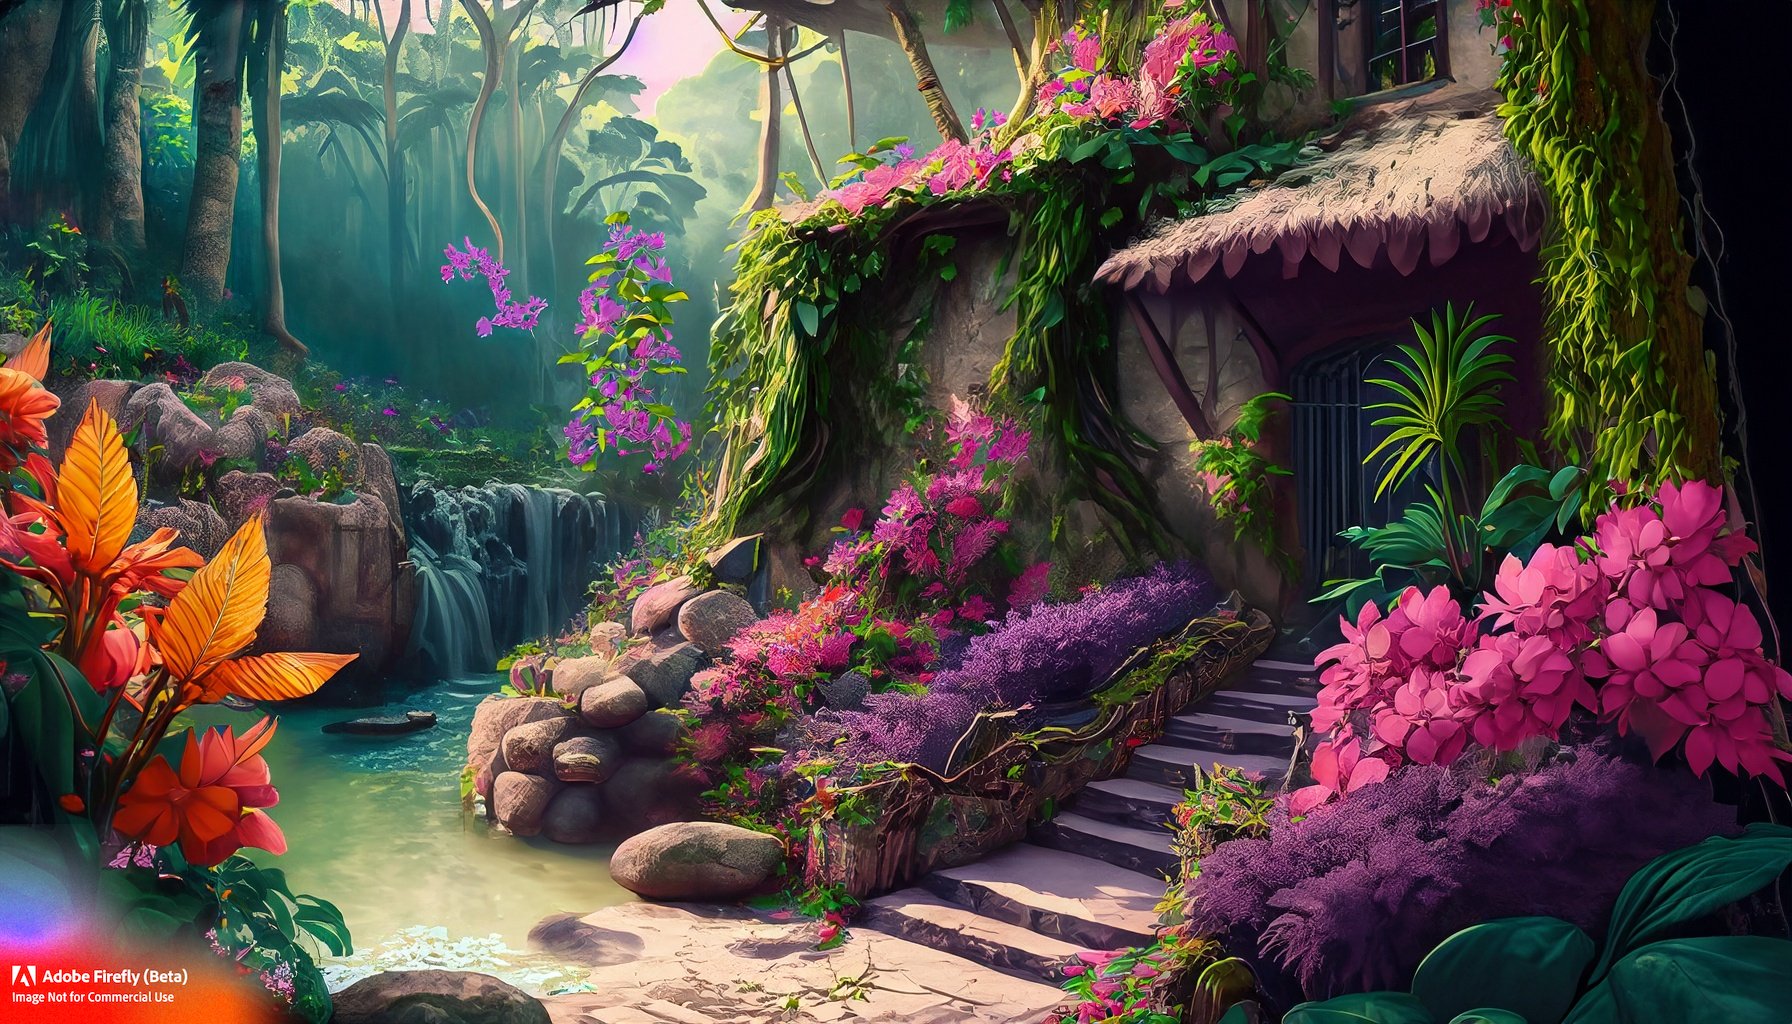 Firefly_A+house in a tropical jungle, climbing vines, flowers of pink, purple, orange. There's a gray stone pathway leading to a stream._art,wide_angle,fantasy_86265.jpg